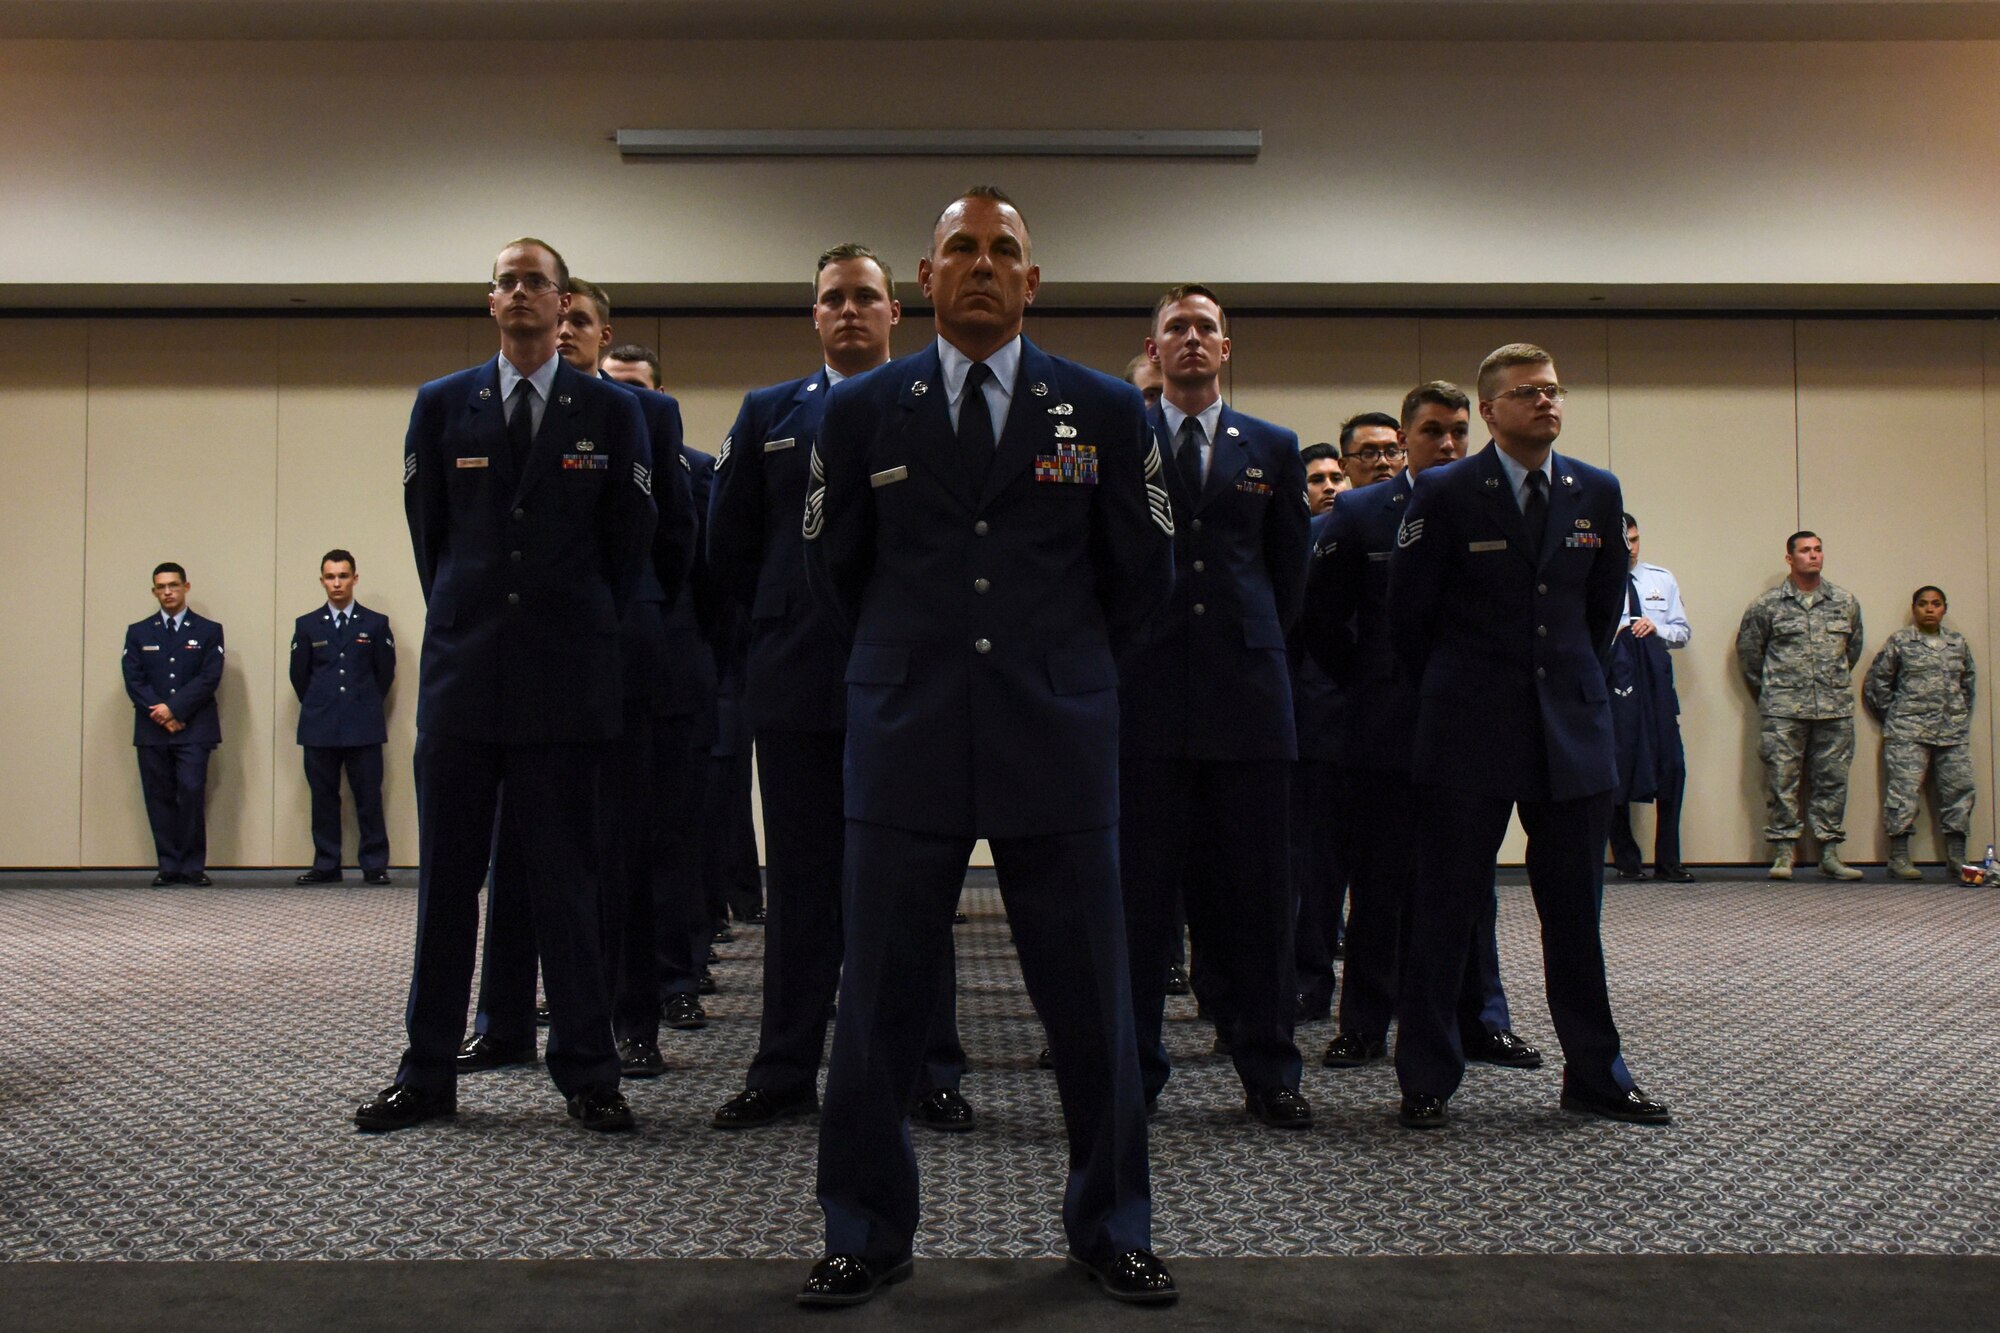 U.S. Air Force Chief Master Sgt. Frank Lubas, 17th Communications Squadron superintendent, stands with members of 17th CS during the change of command ceremony in the Event Center on Goodfellow Air Force Base, Texas, May 10, 2018. The 17th CS provides cyber operations and support to enable the 17th Training Wing to produce the best Intelligence, Surveillance, and Reconnaissance professionals and firefighters in the world. (U.S. Air Force photo by Airman 1st Class Zachary Chapman/Released)